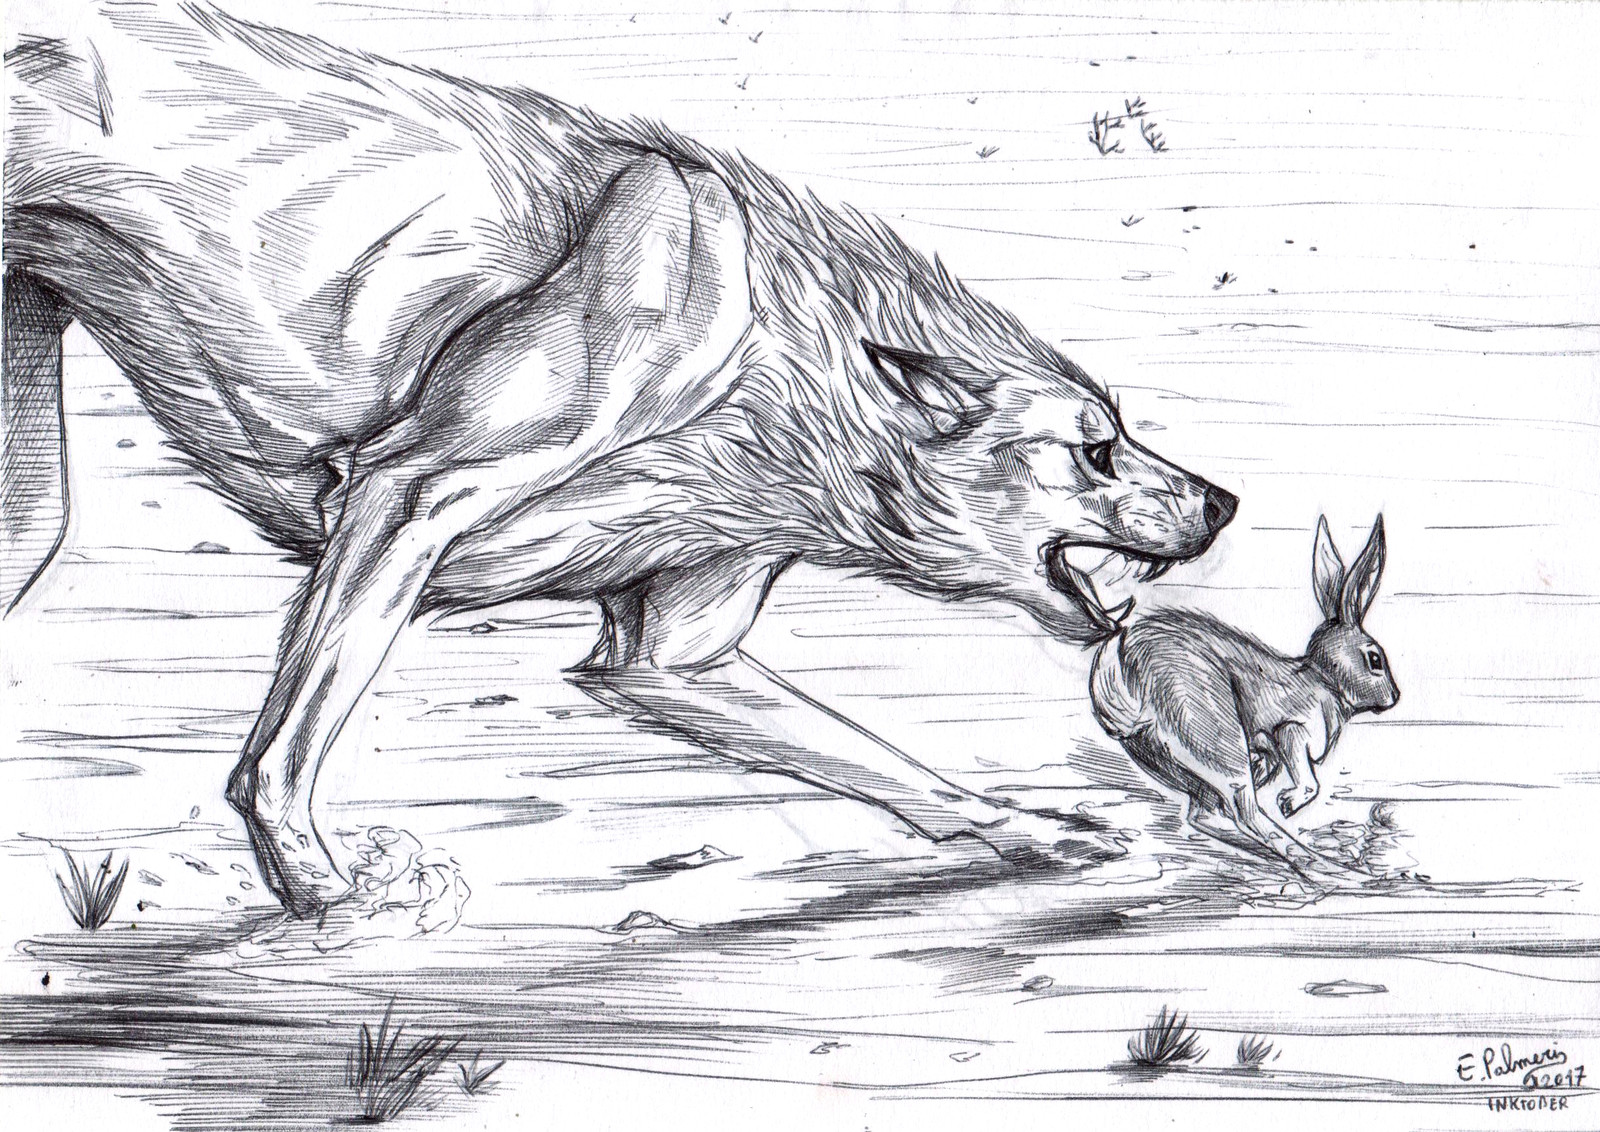 Another kind of swift... a wolf (well, a werewolf OC in lupus form, it may look like a wolf...) trying to catch a hare.